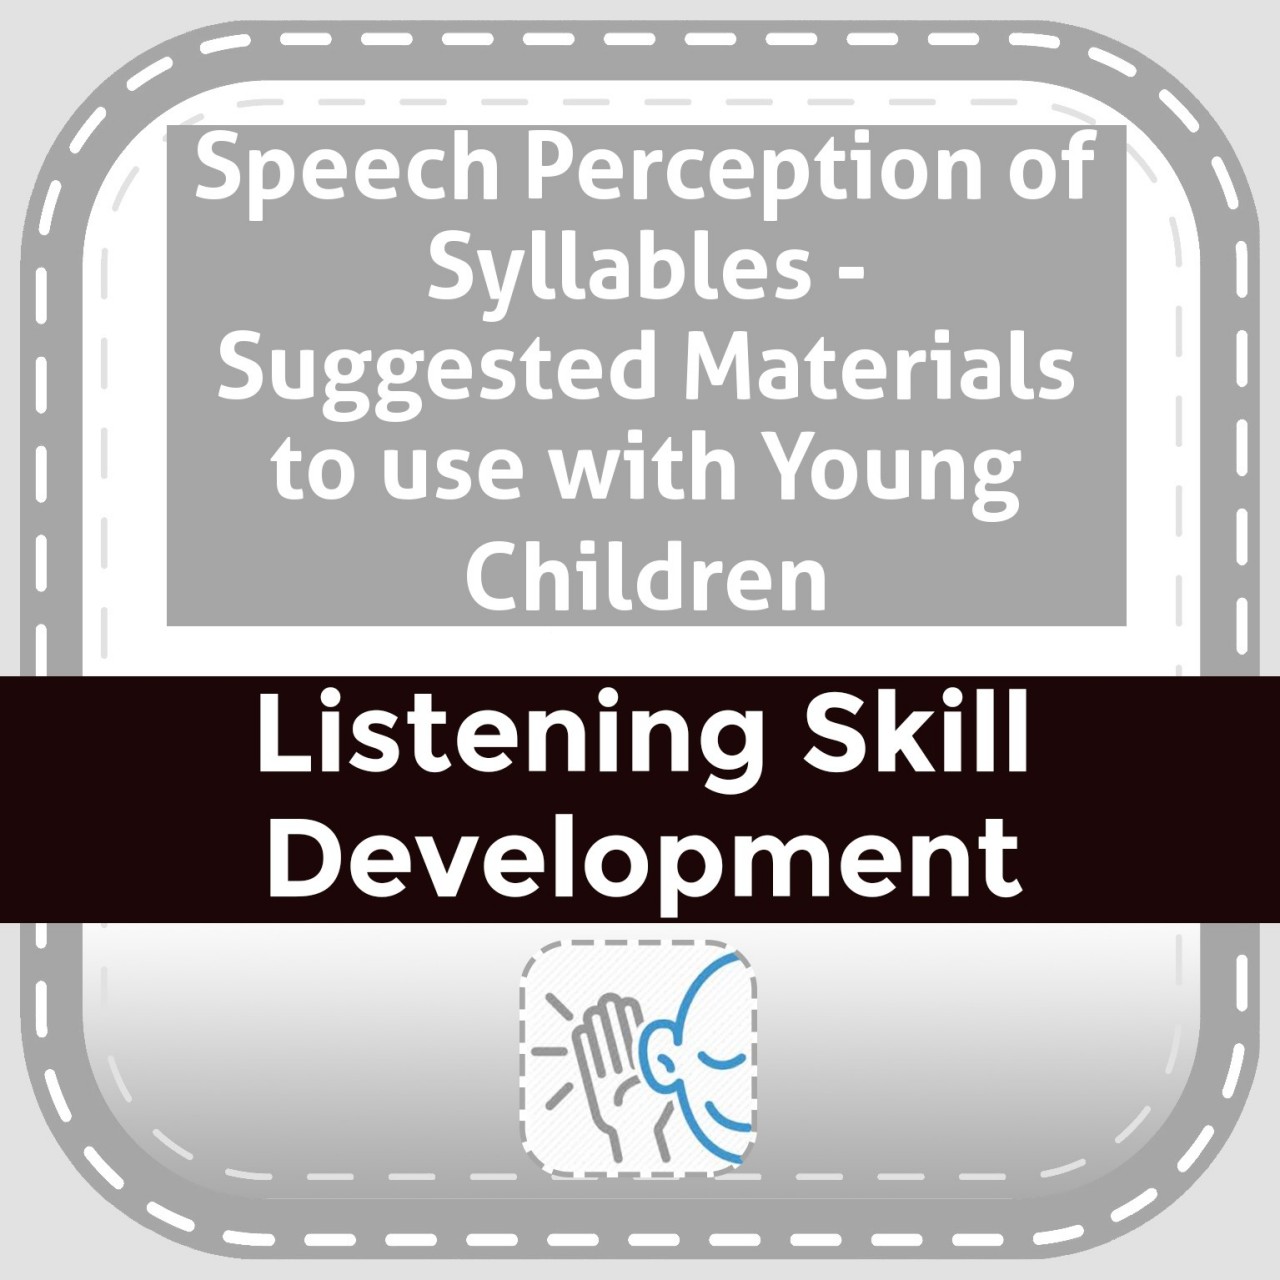 Speech Perception of Syllables - Suggested Materials to use with Young Children